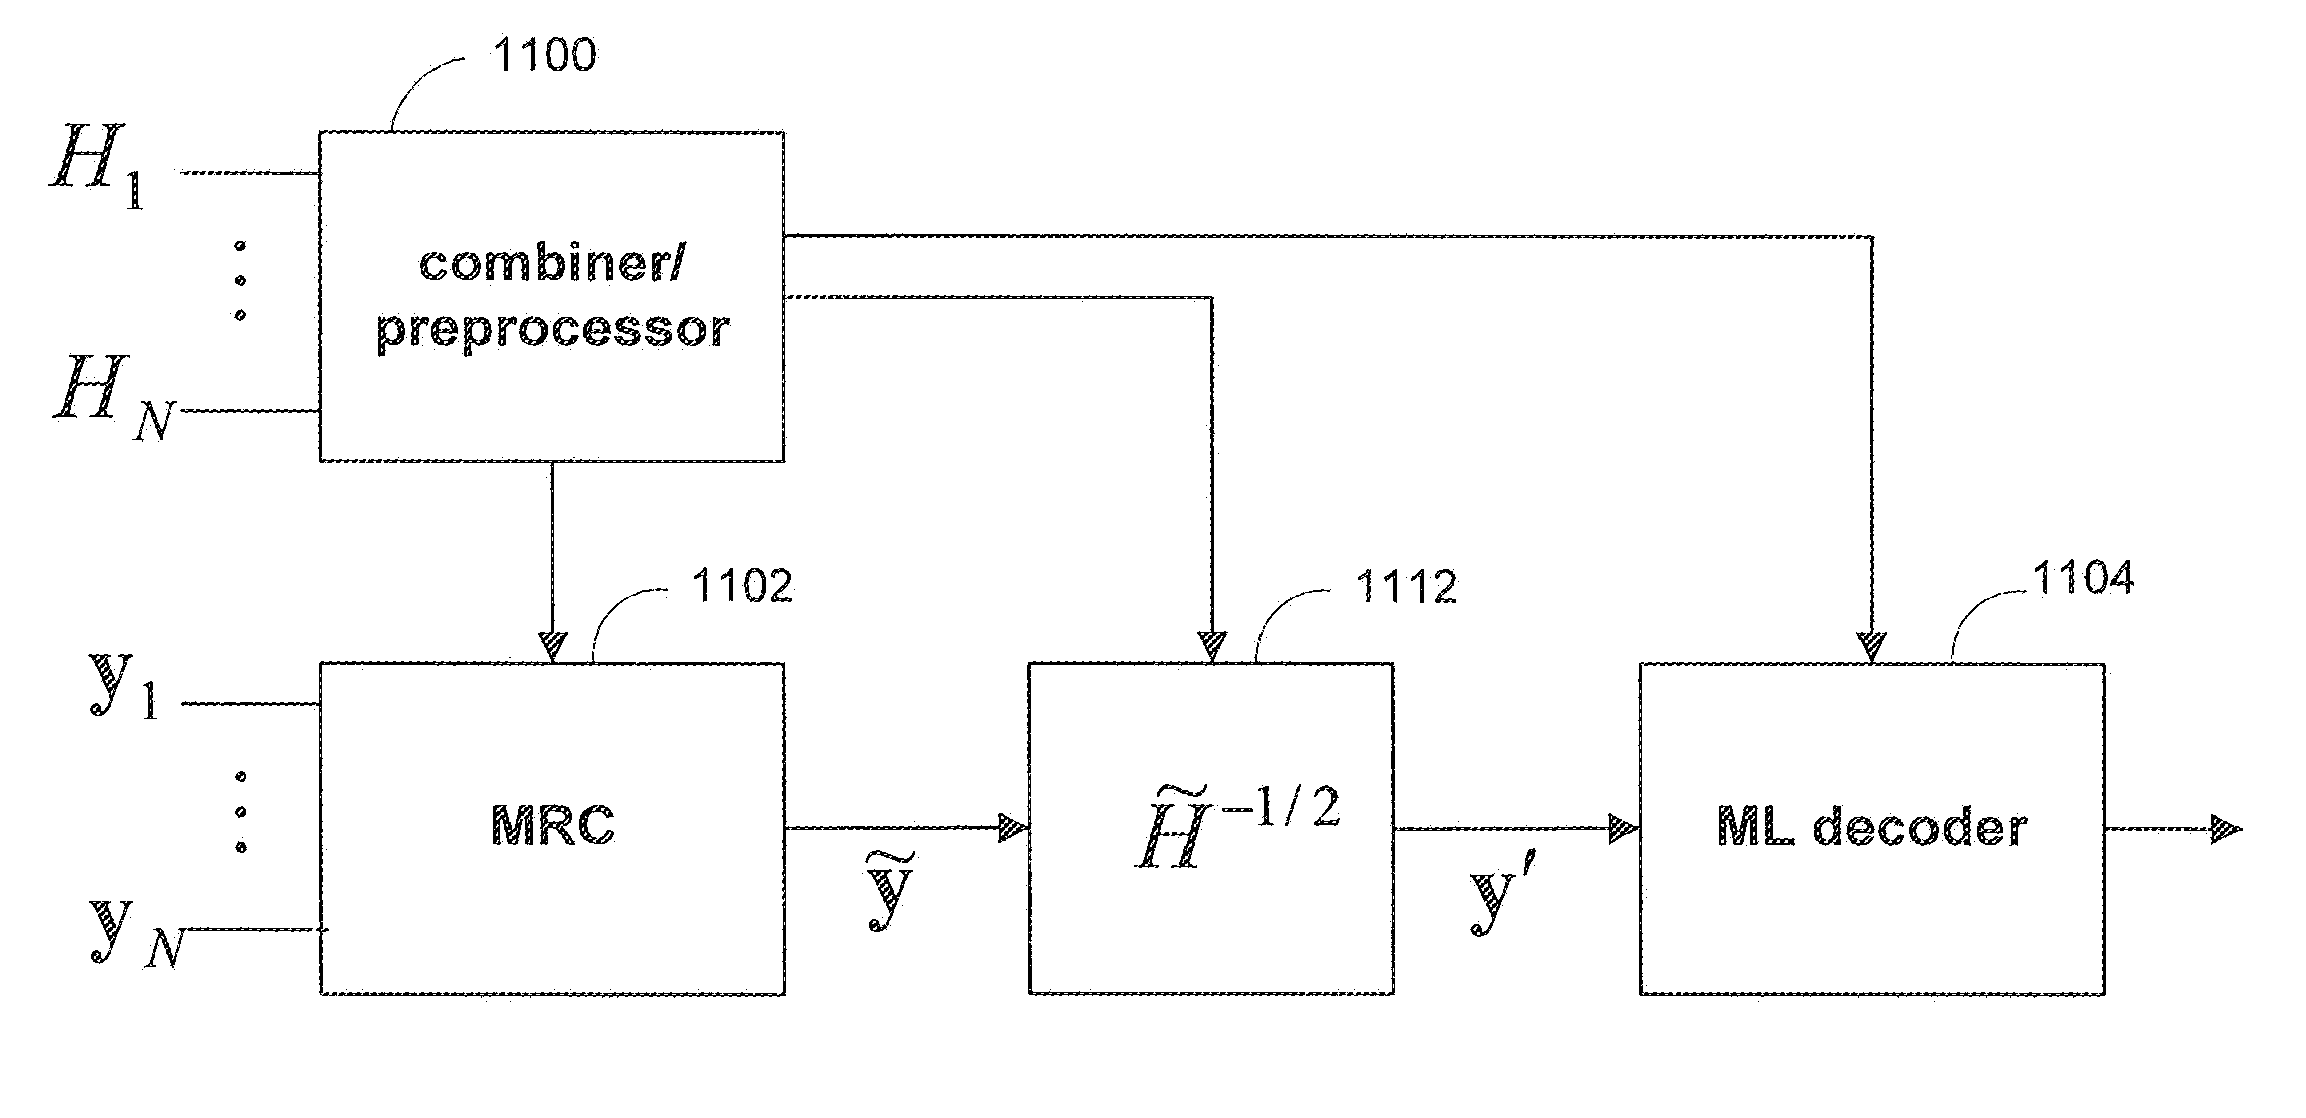 Symbol-level combining for multiple input multiple output (MIMO) systems with hybrid automatic repeat request (HARQ) and/or repetition coding